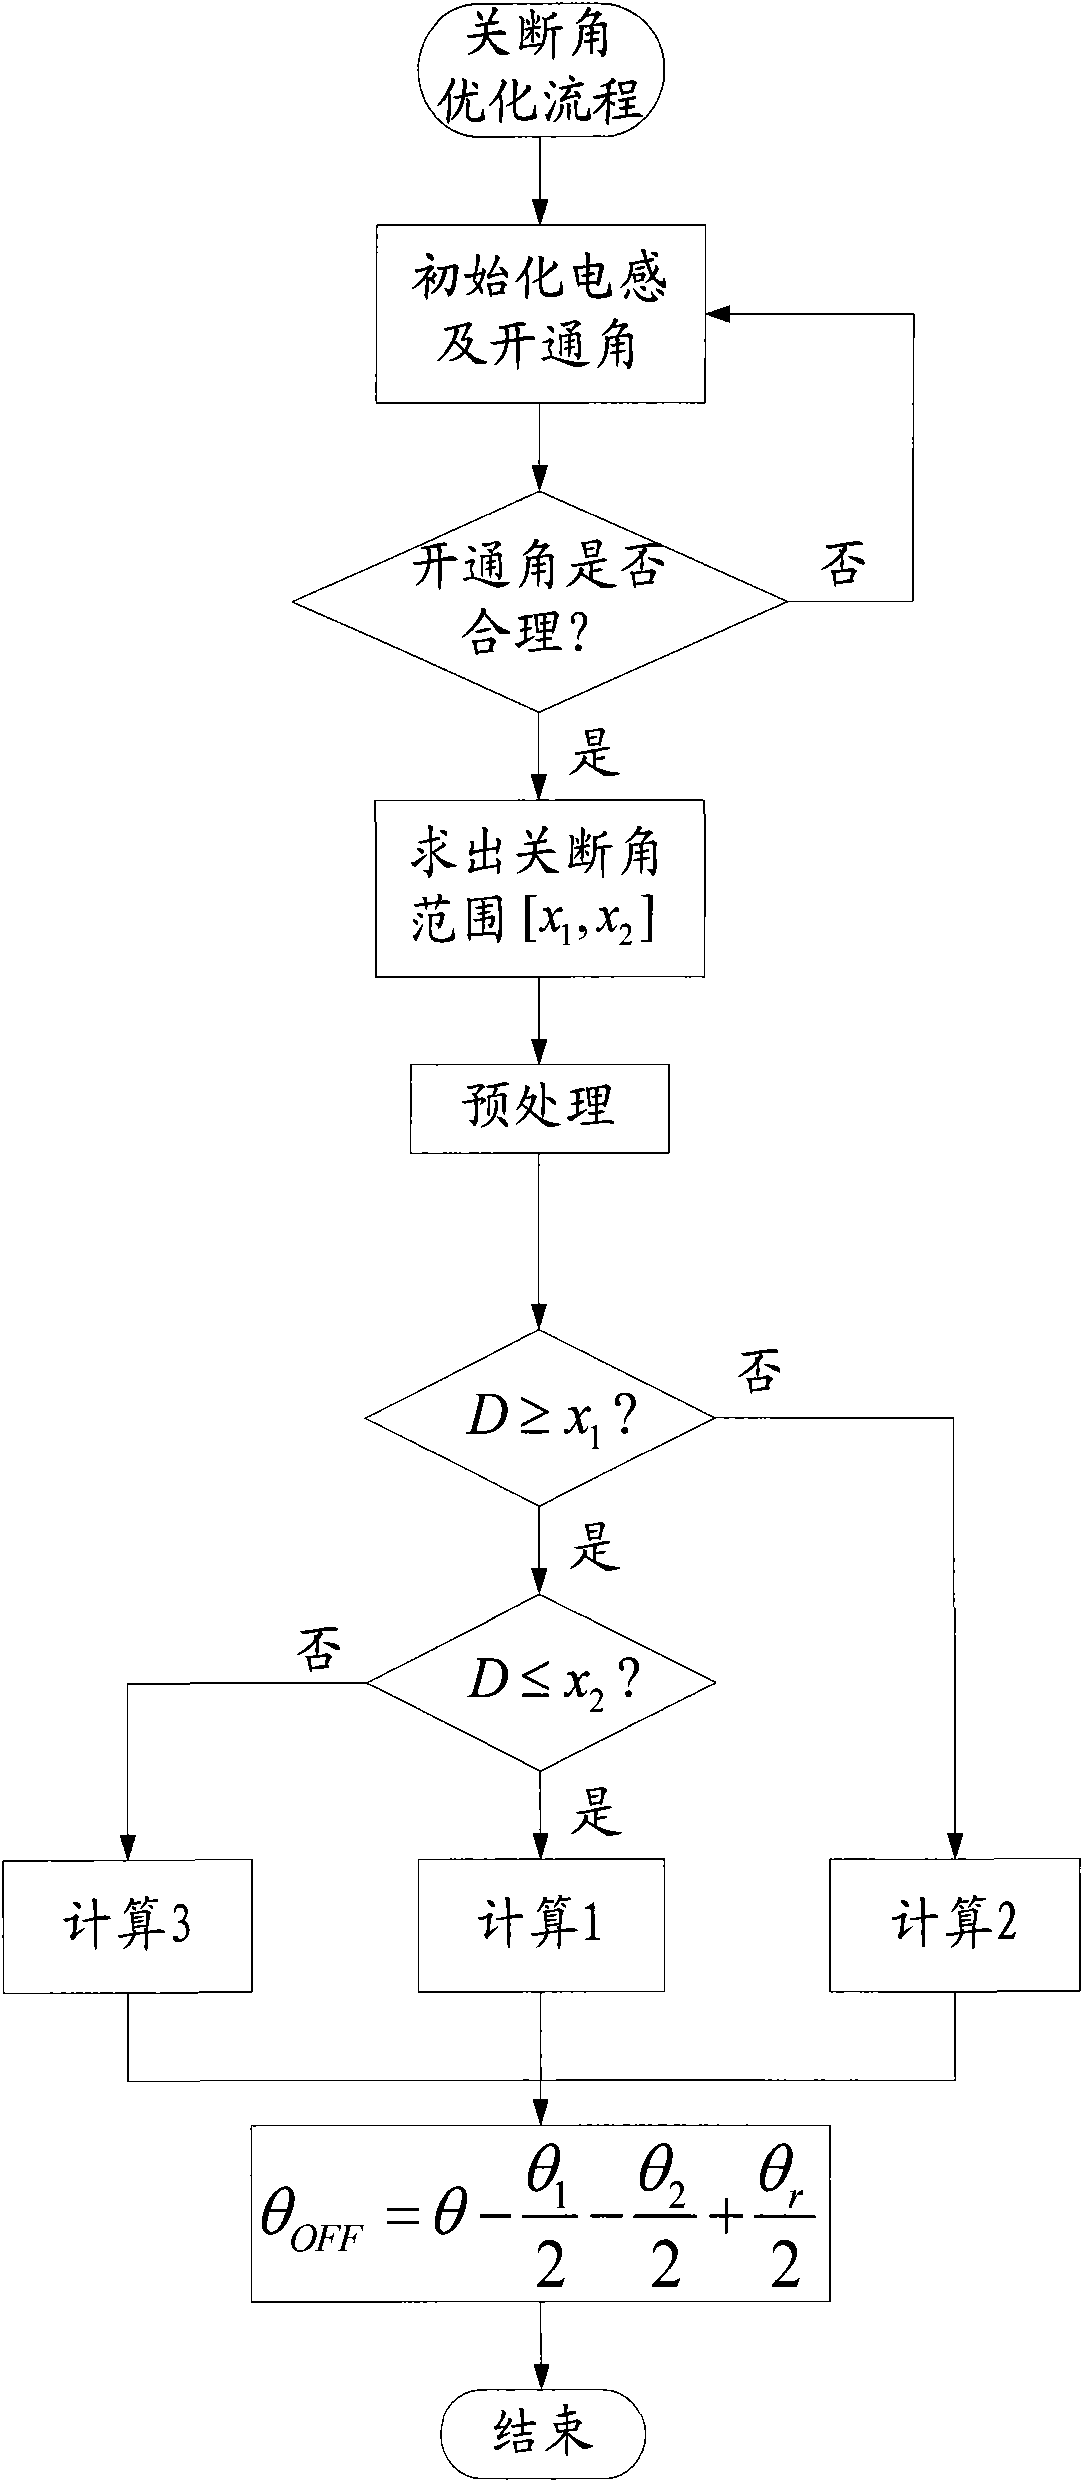 Method for fixing turn-on angle and optimizing turn-off angle of switched reluctance generator